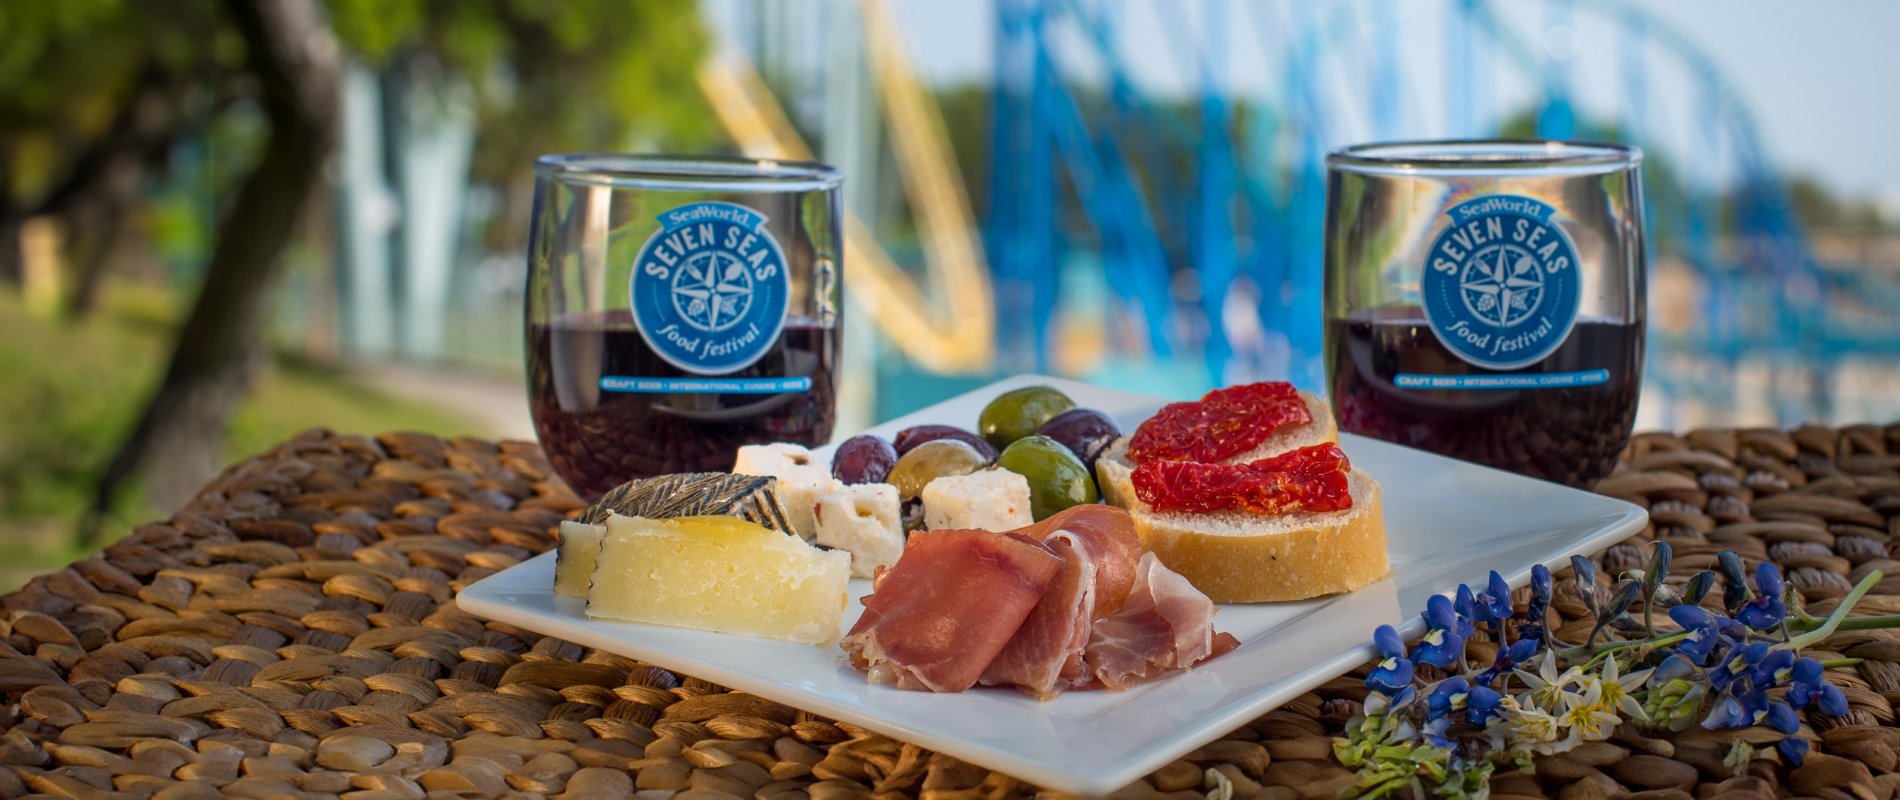 A plate of food and two wine glasses from the Seven Seas Food Festival at SeaWorld San Antonio.